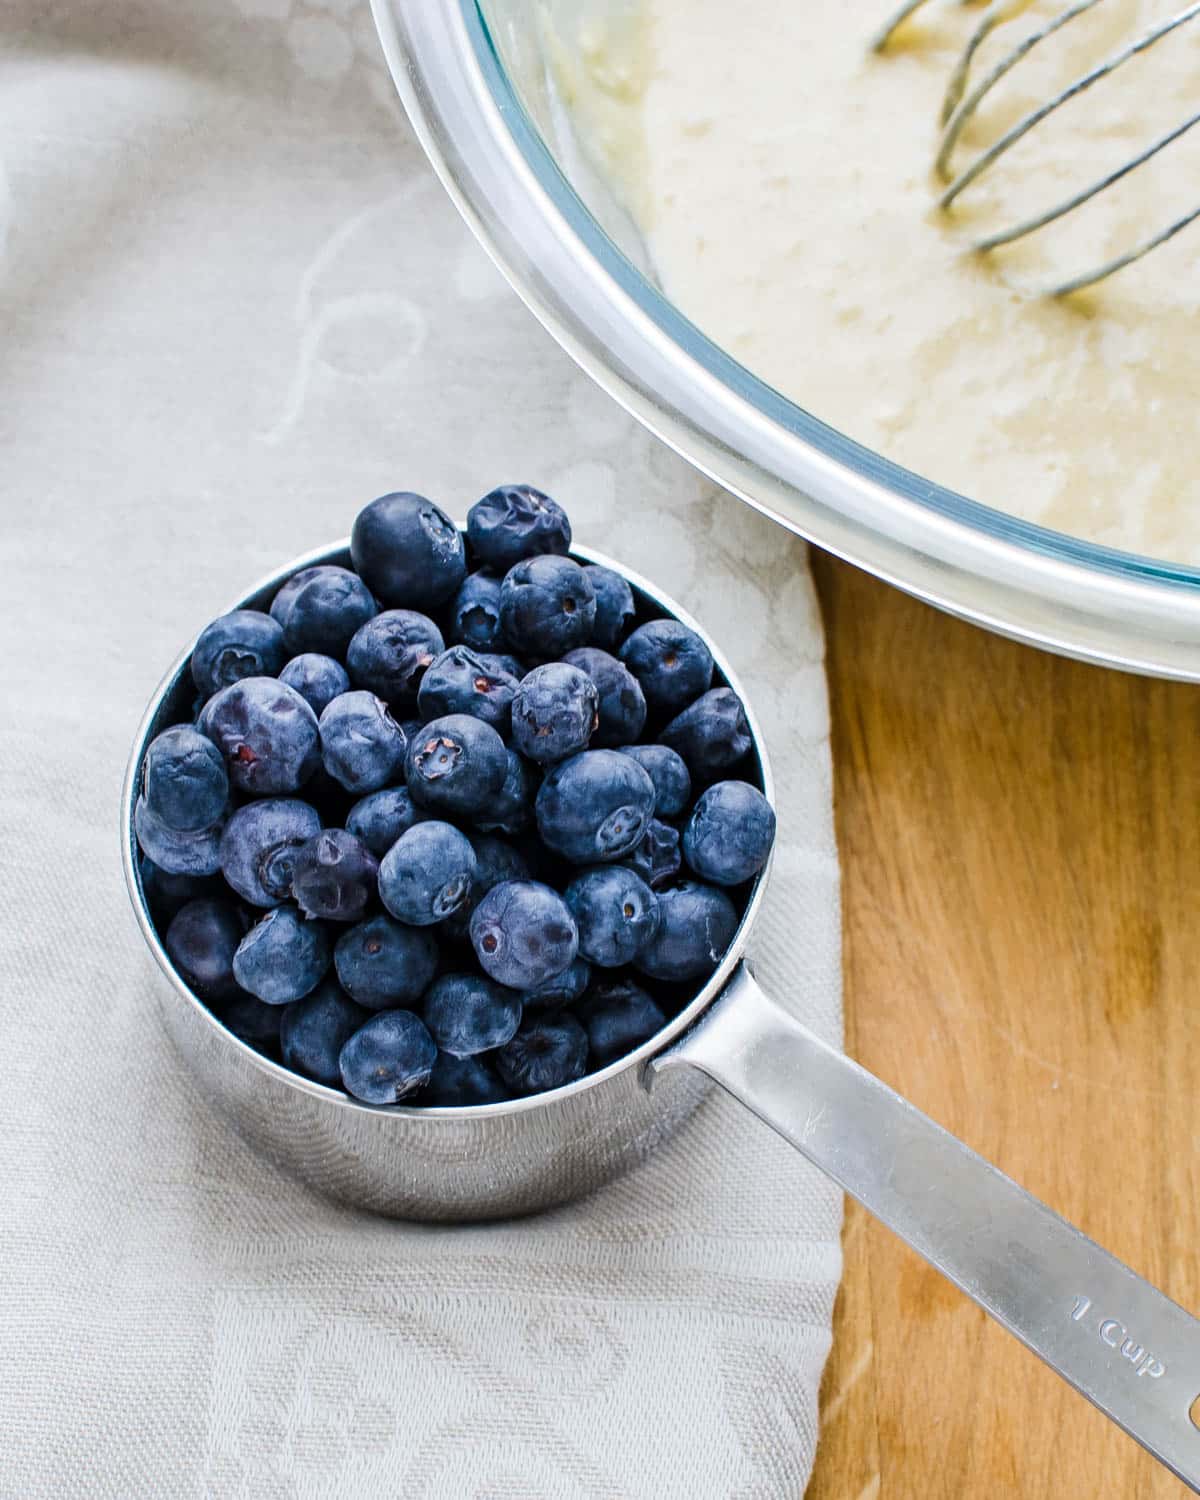 A cup of fresh blueberries next to the batter.